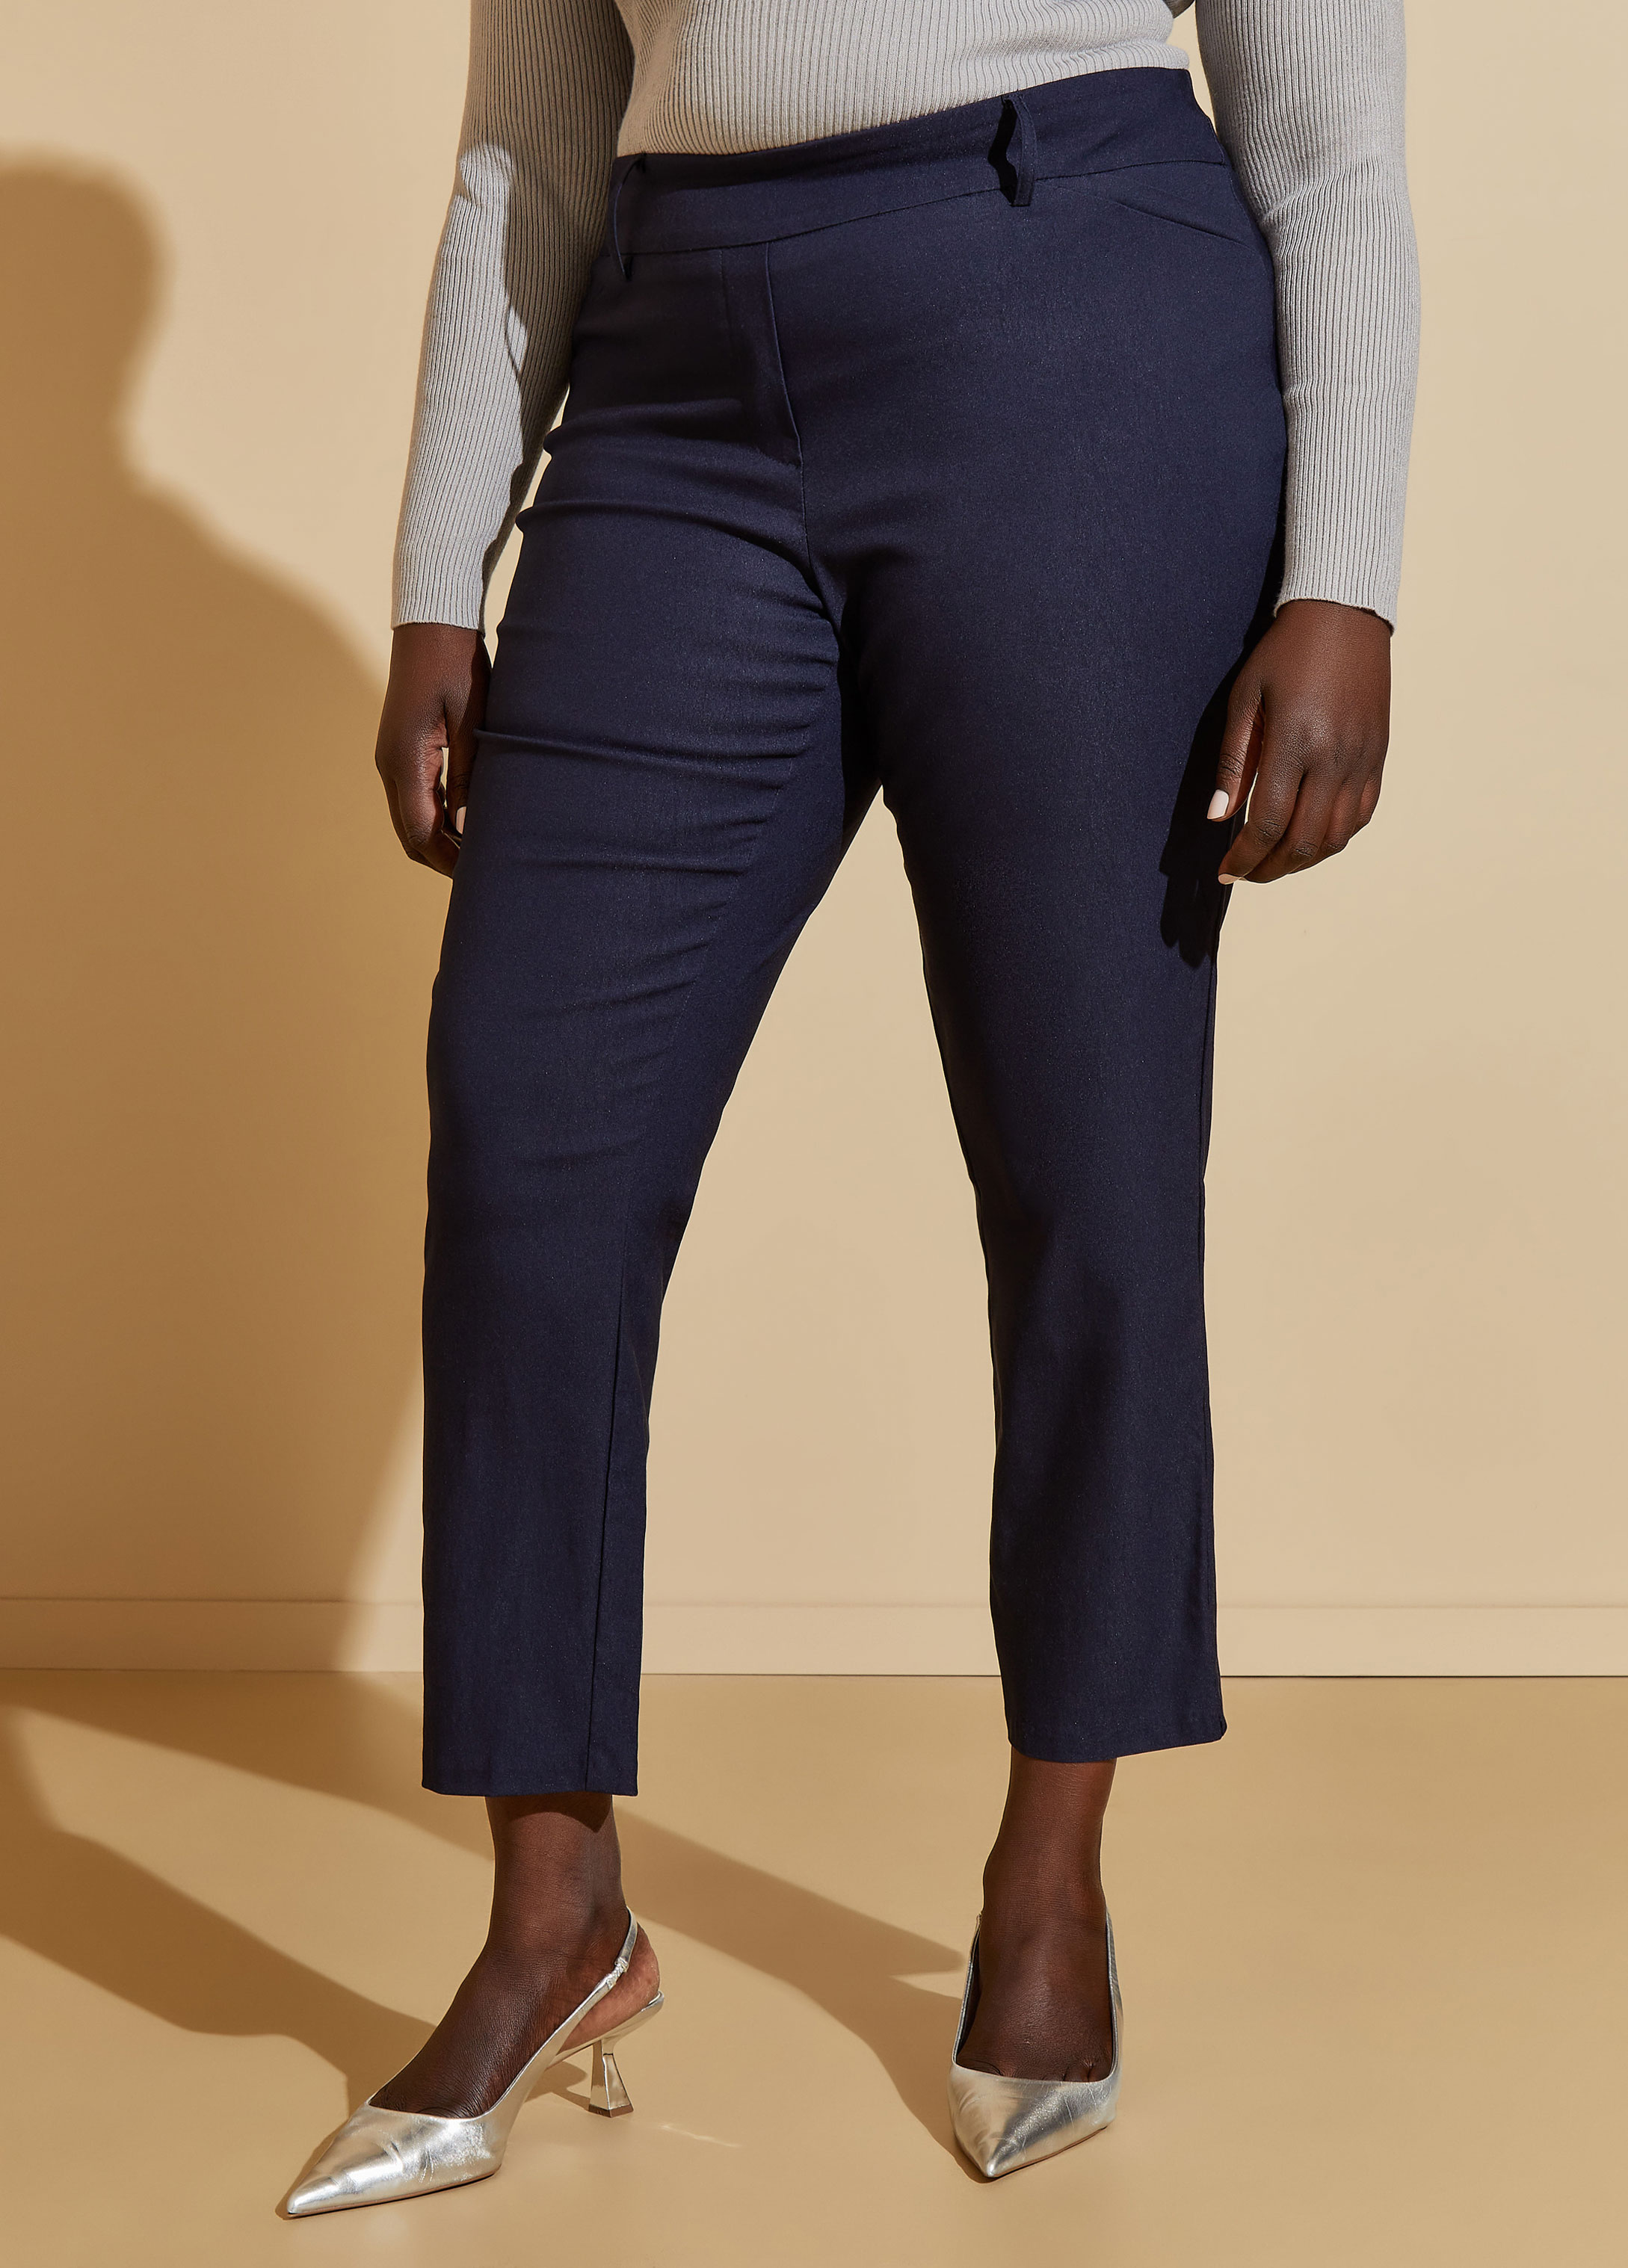 Plus Size Mid Rise Pull On Ankle Pants, BLUE, 10/12 - Ashley Stewart